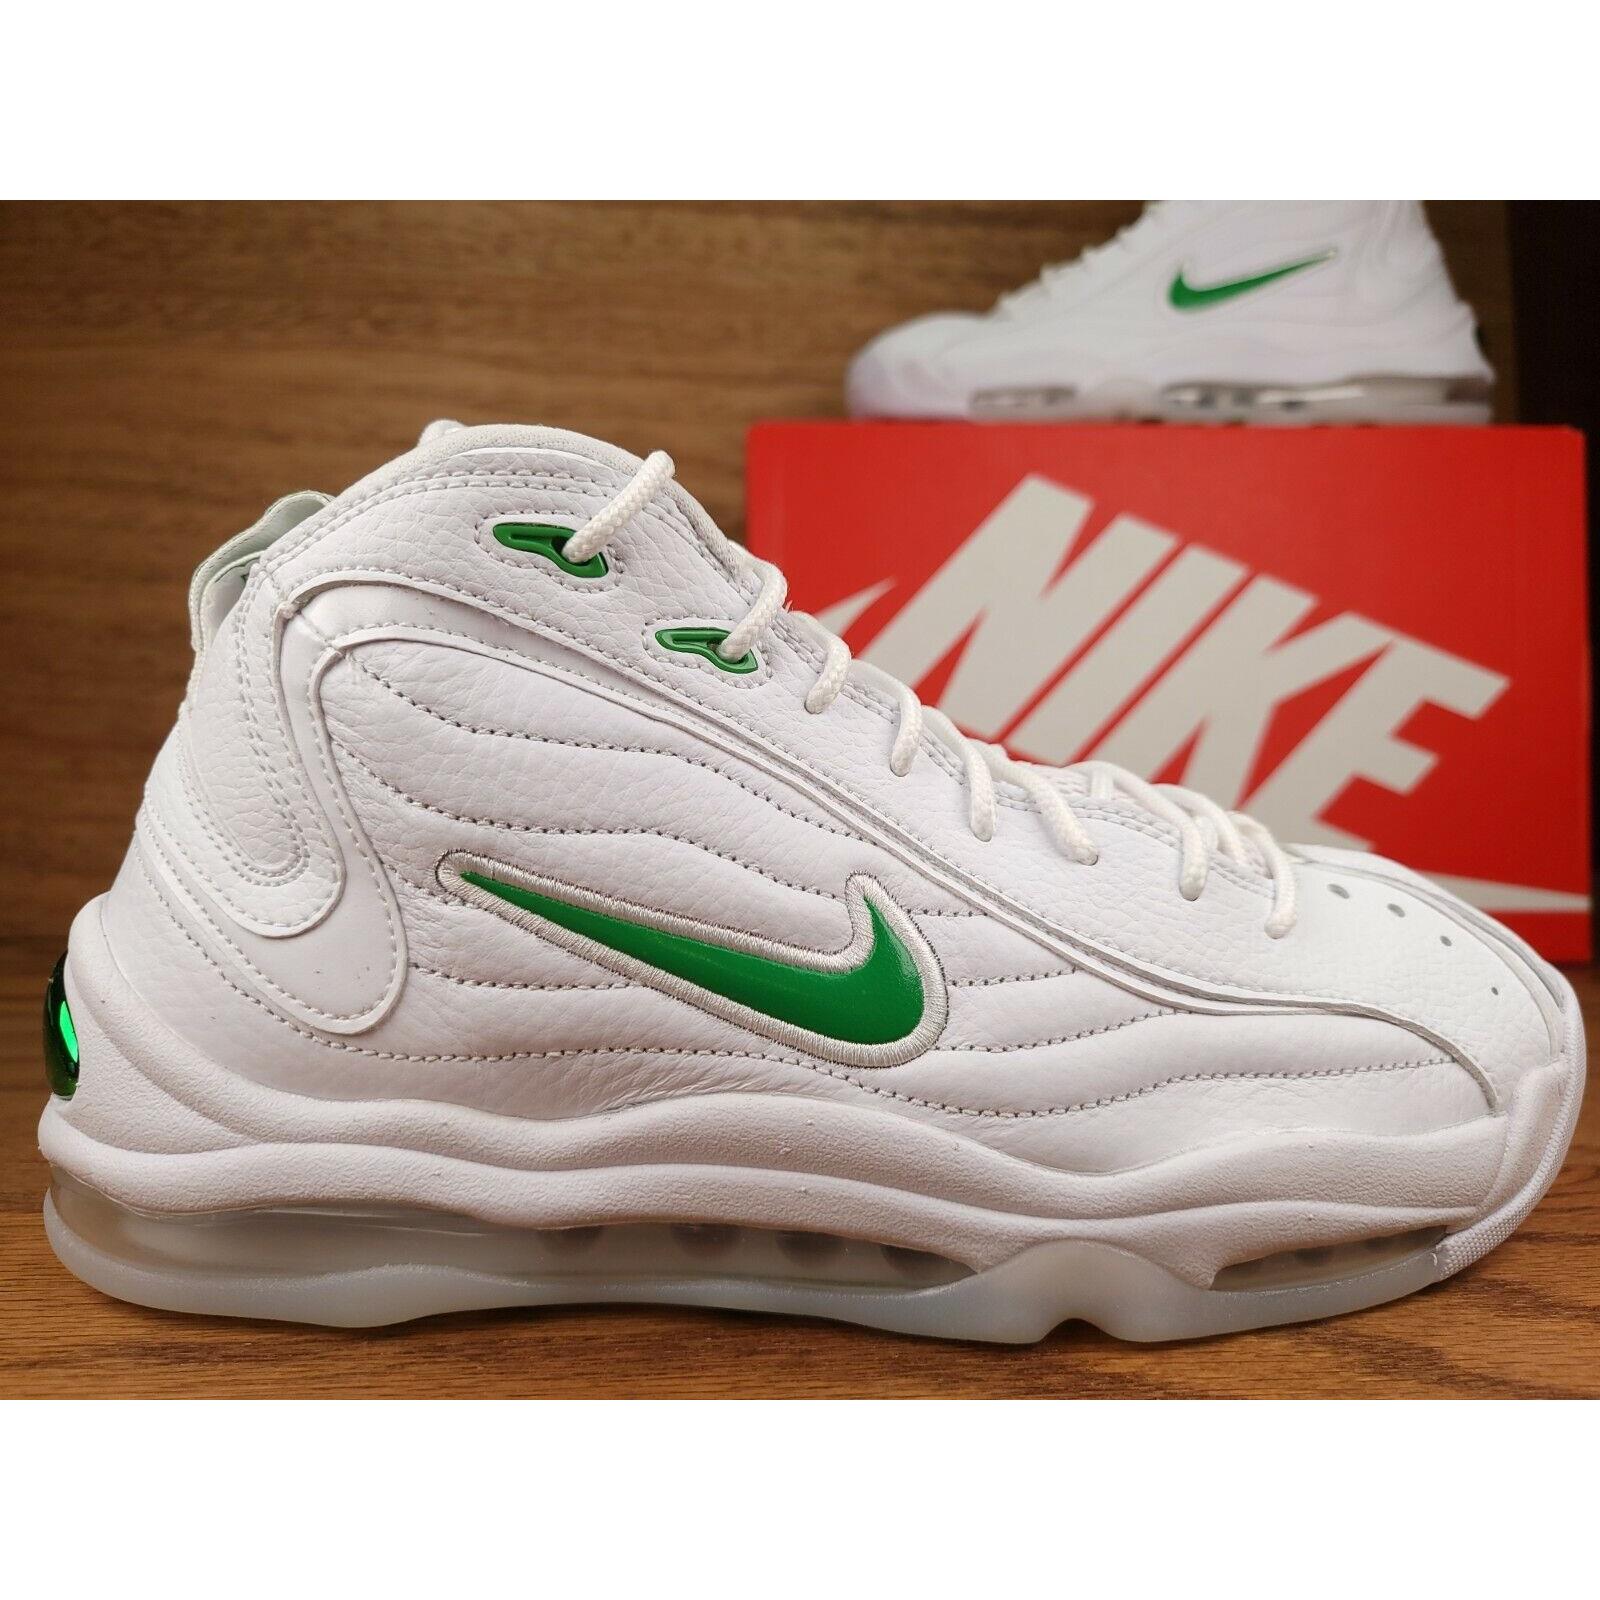 Nike Air Total Max Uptempo Athletic Shoe White Green Mens Size 11